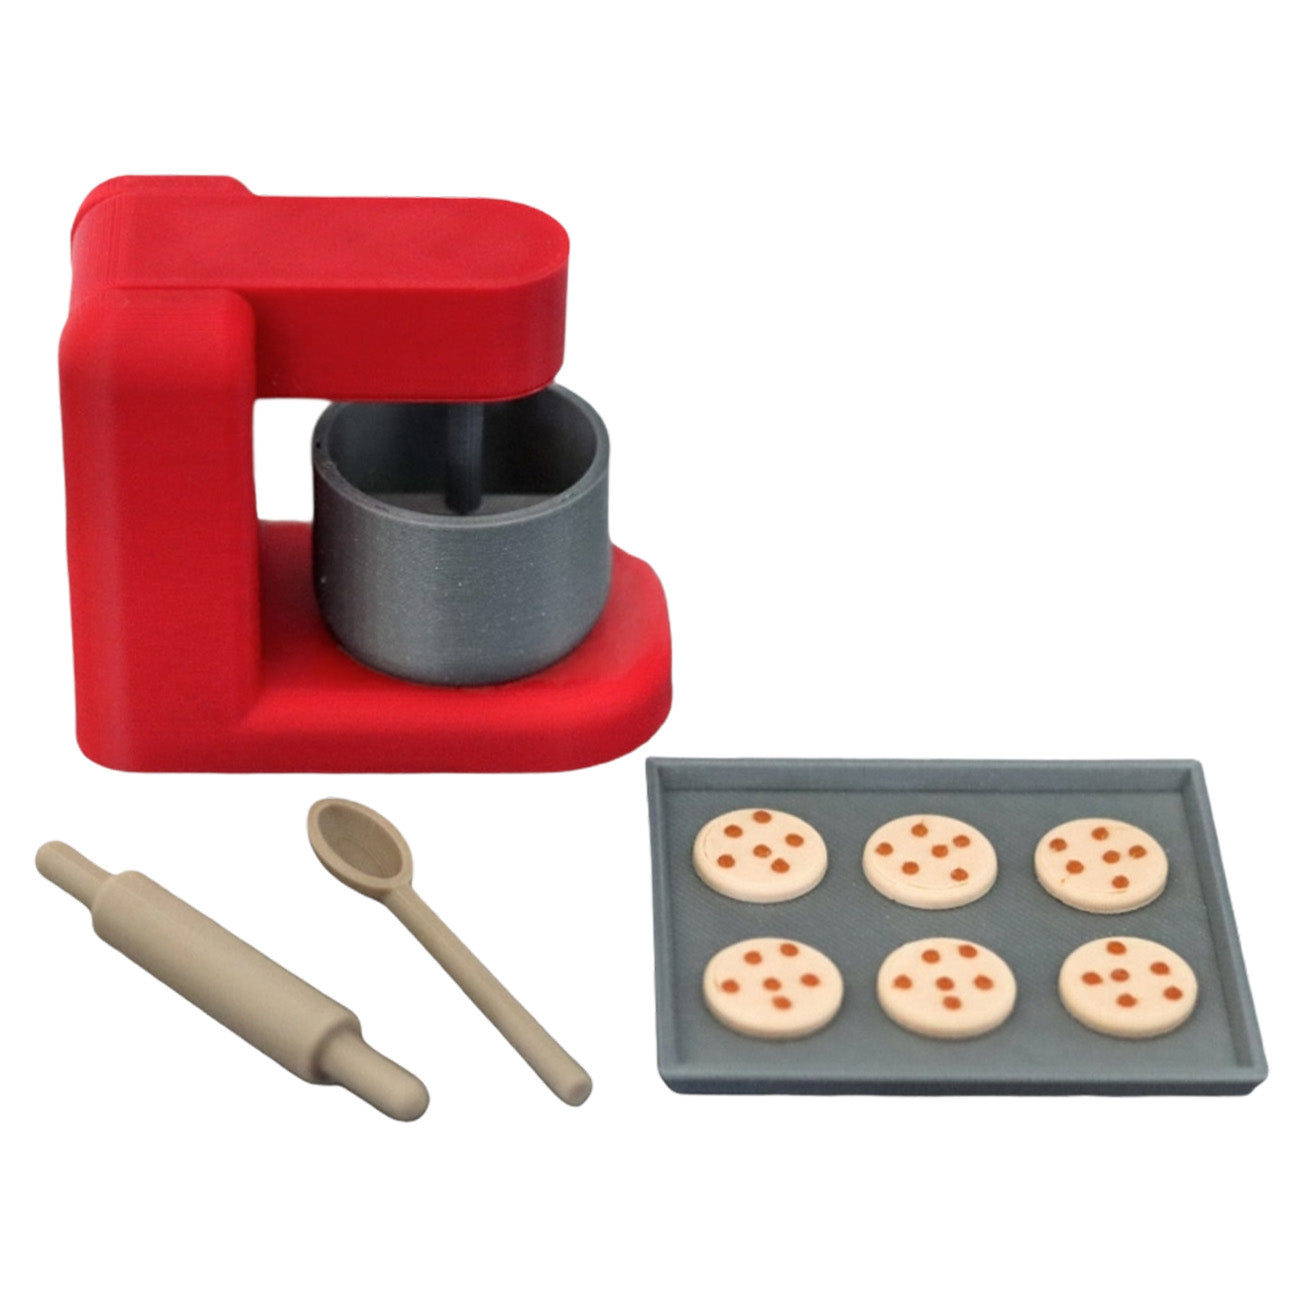 Elf Baking Set, Red mixer, silver bowl, miniature rolling pin, spoon, tray and chocolate chip cookies